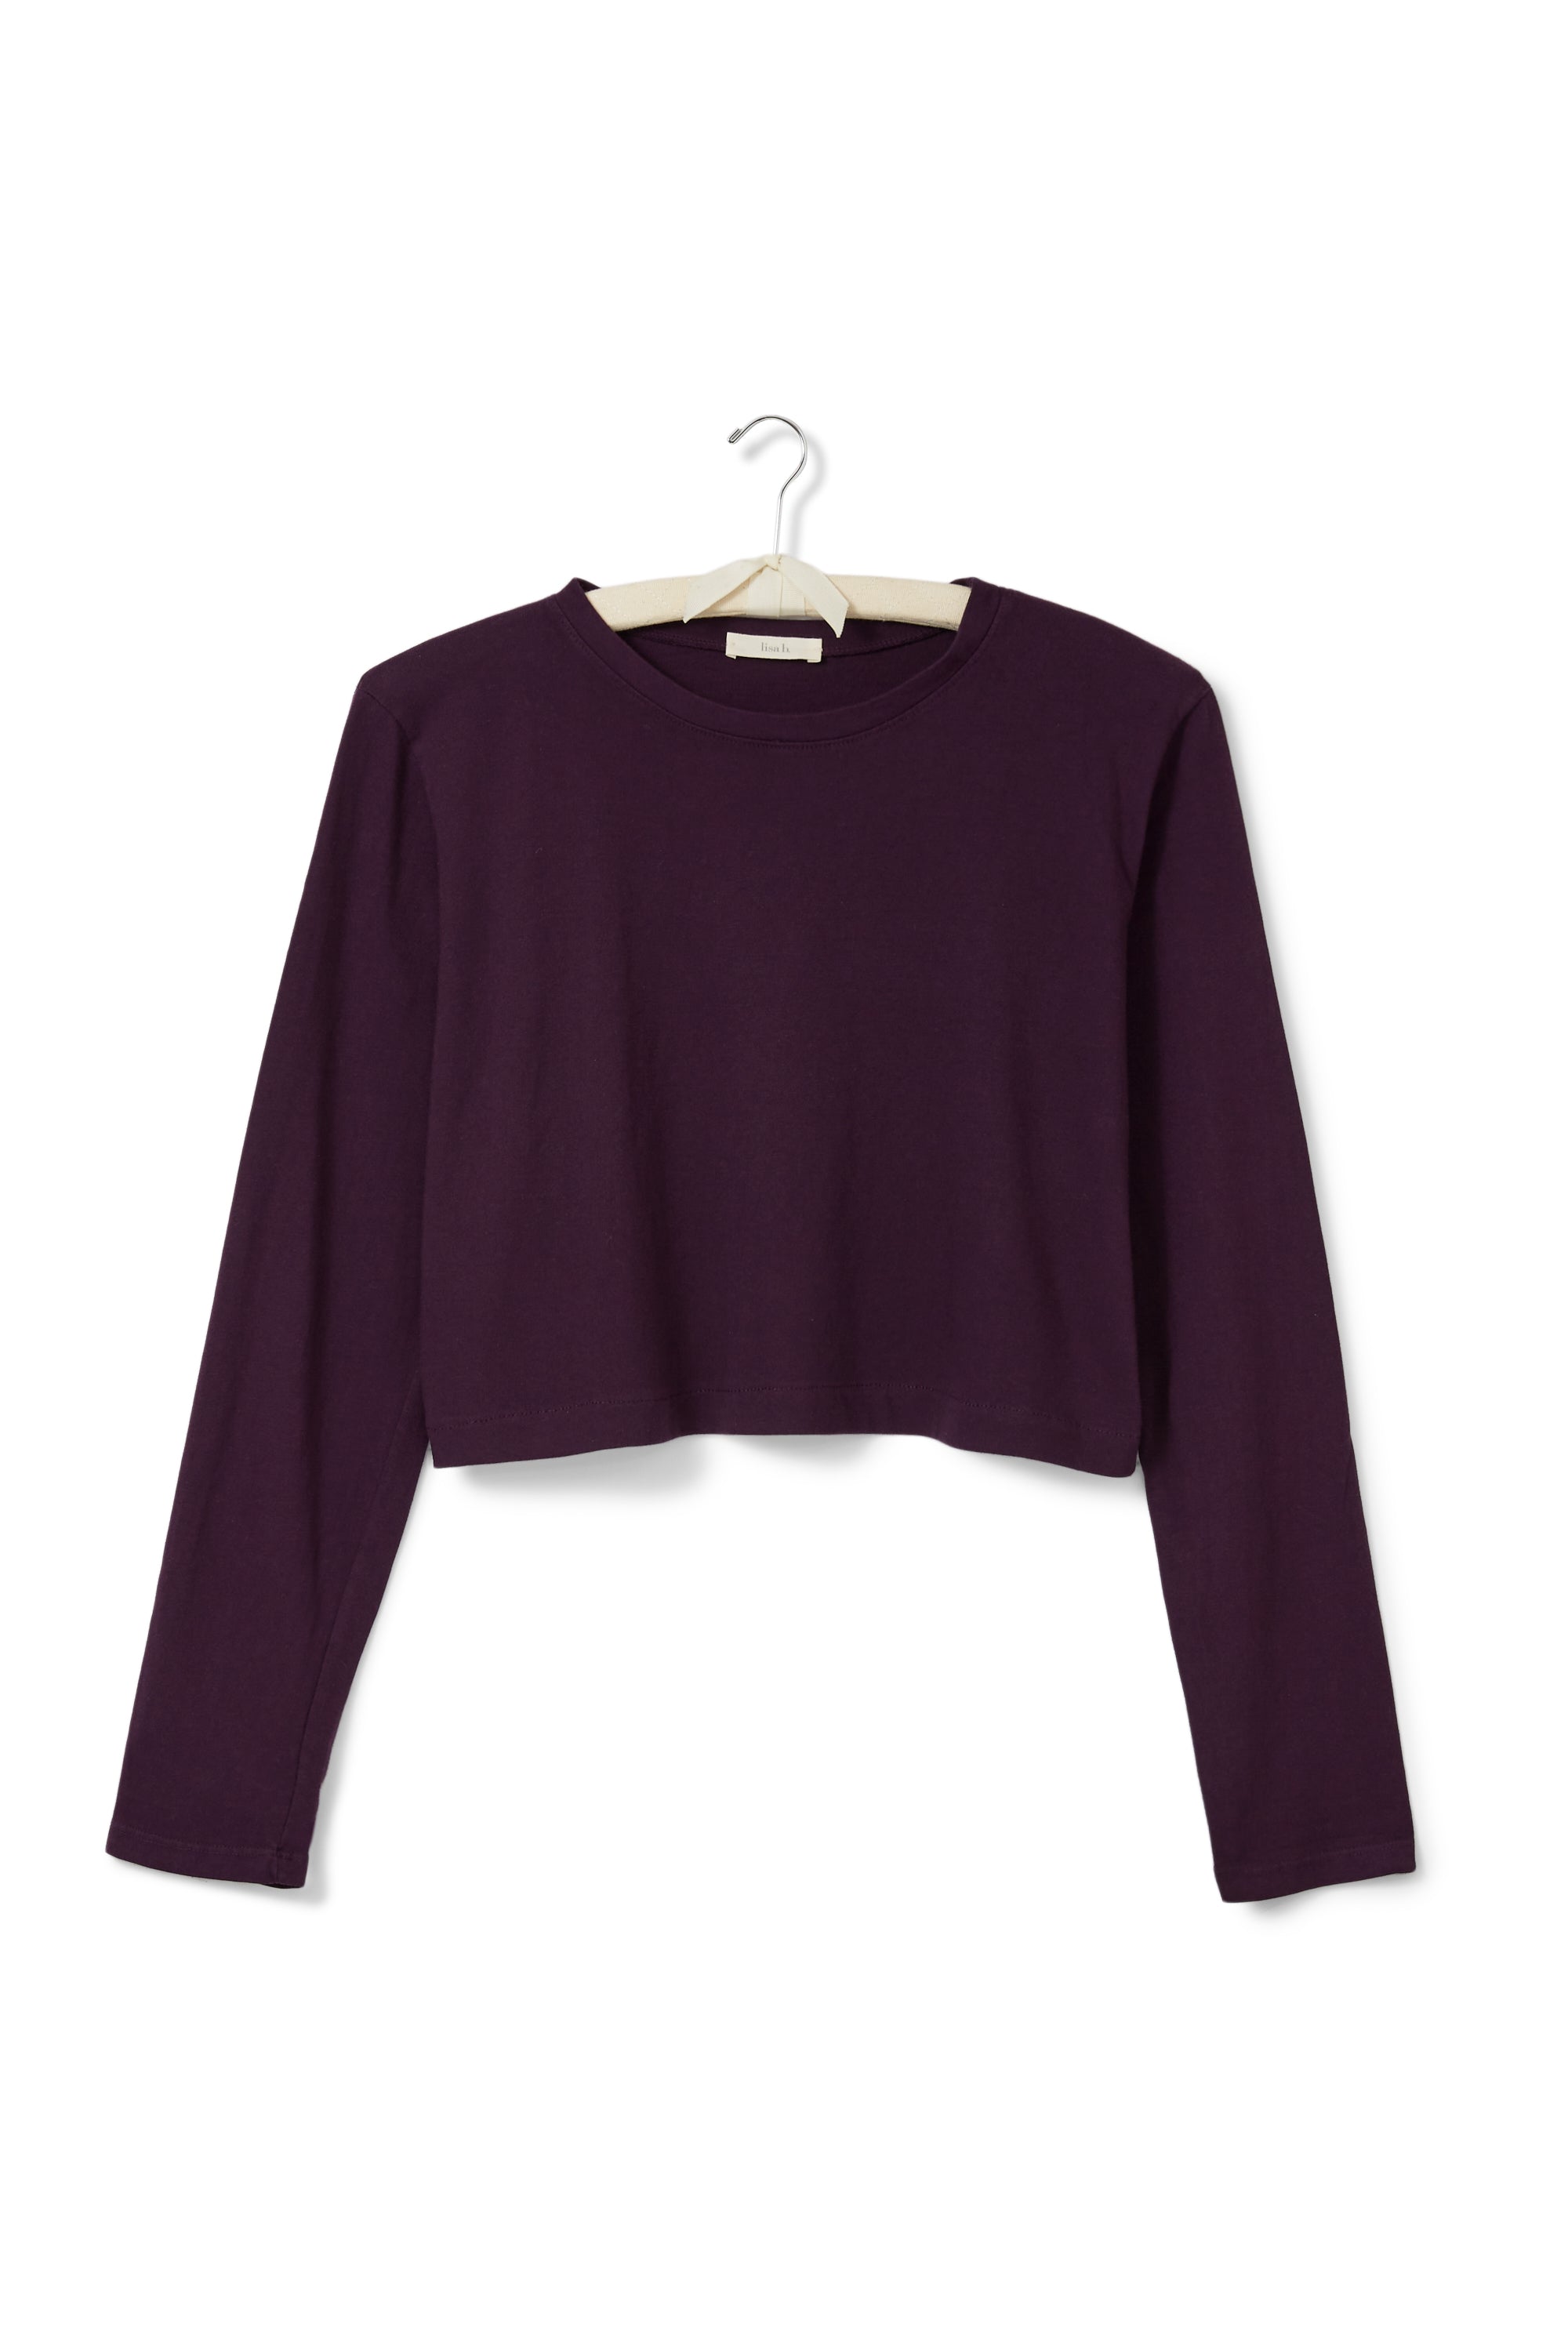 cropped long sleeve relaxed crew neck tee shirt